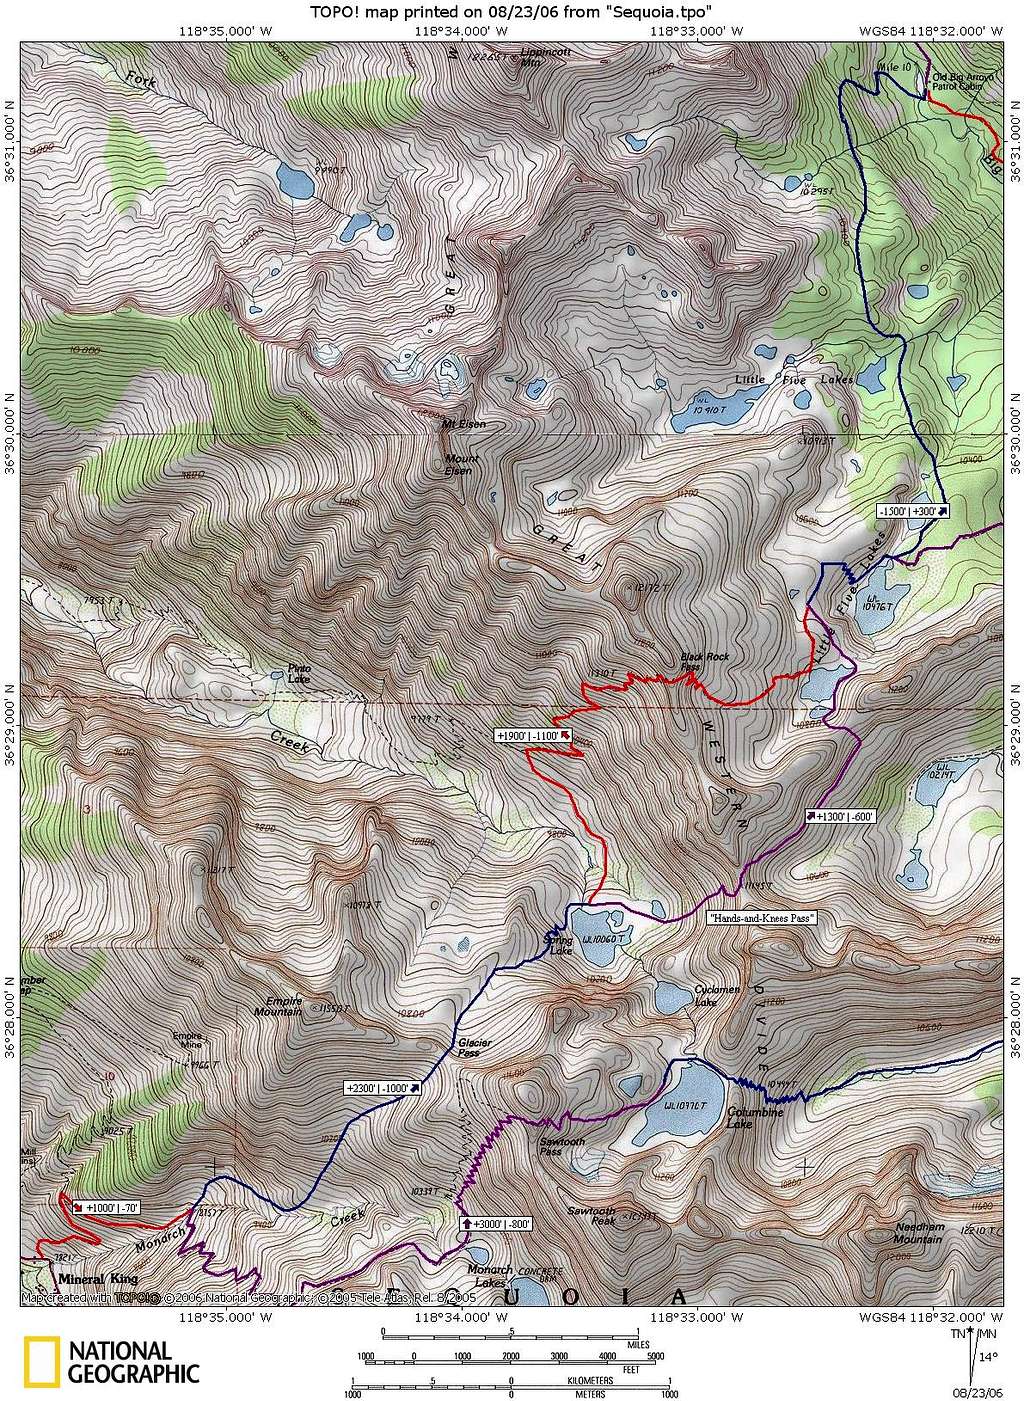 Black Kaweah approach map from Mineral King